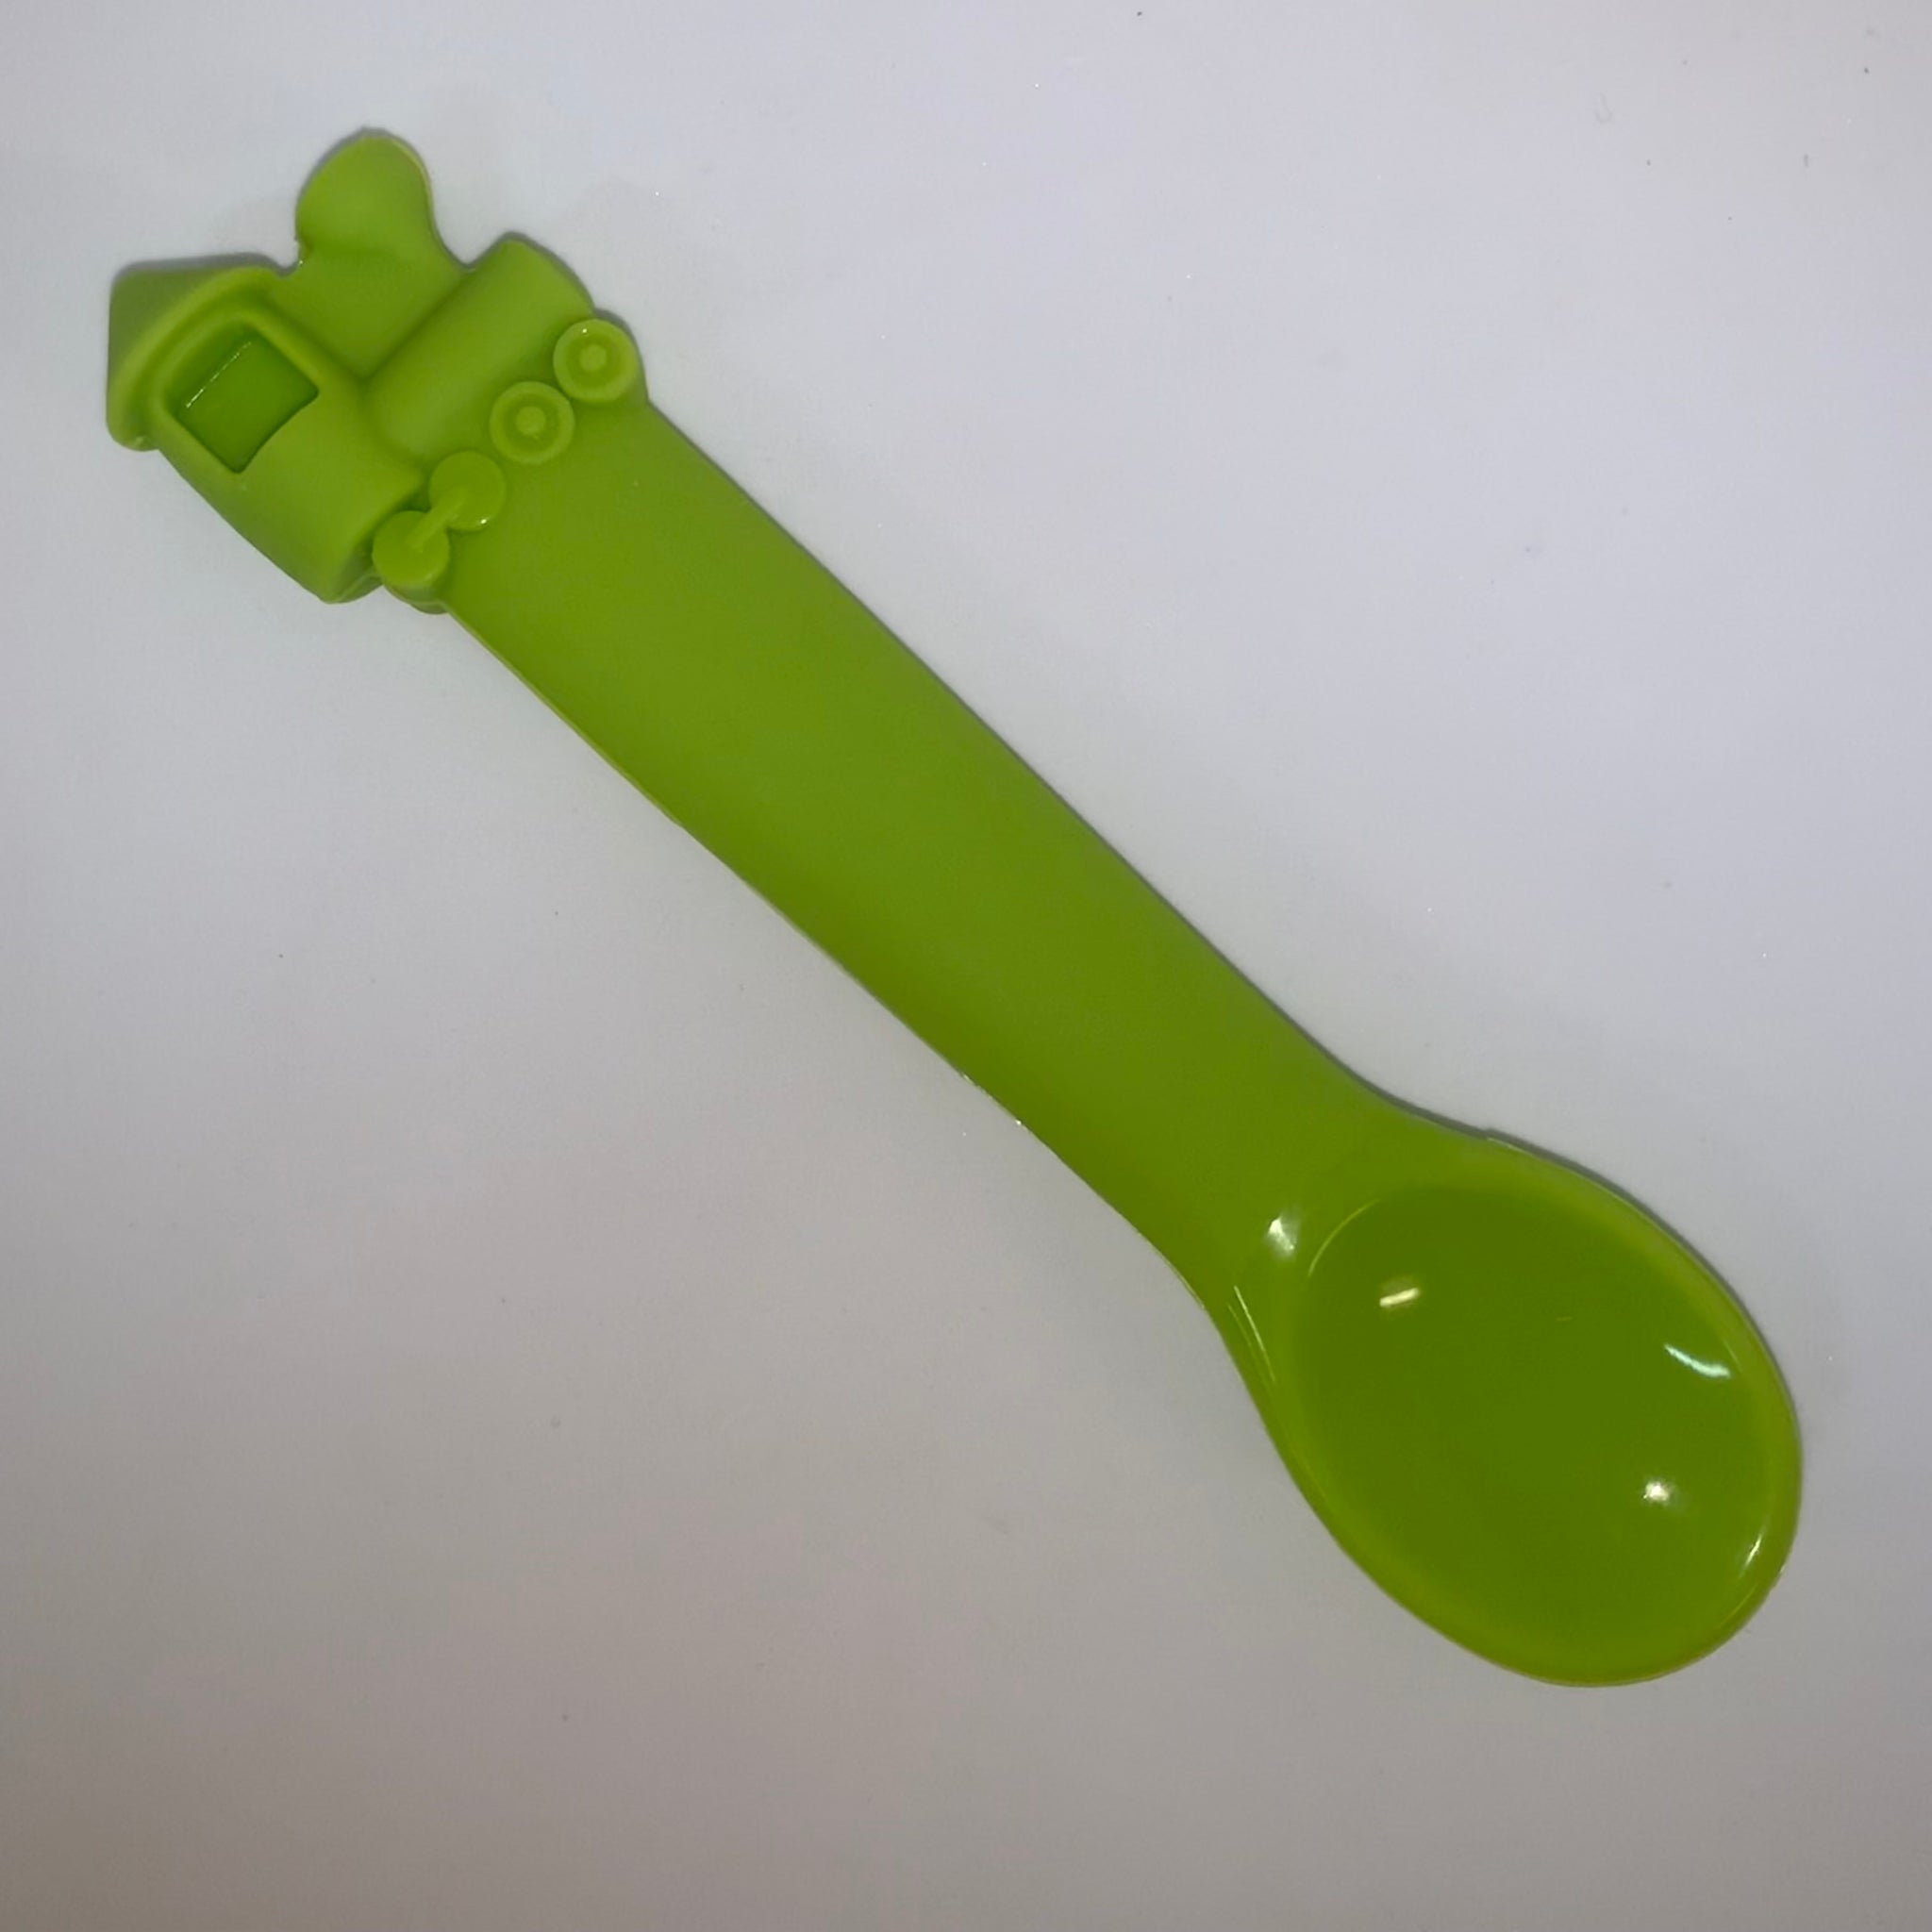 4 Stephan Baby L2402 Silicone Spoon - Star ($3.51 @ 4 min)